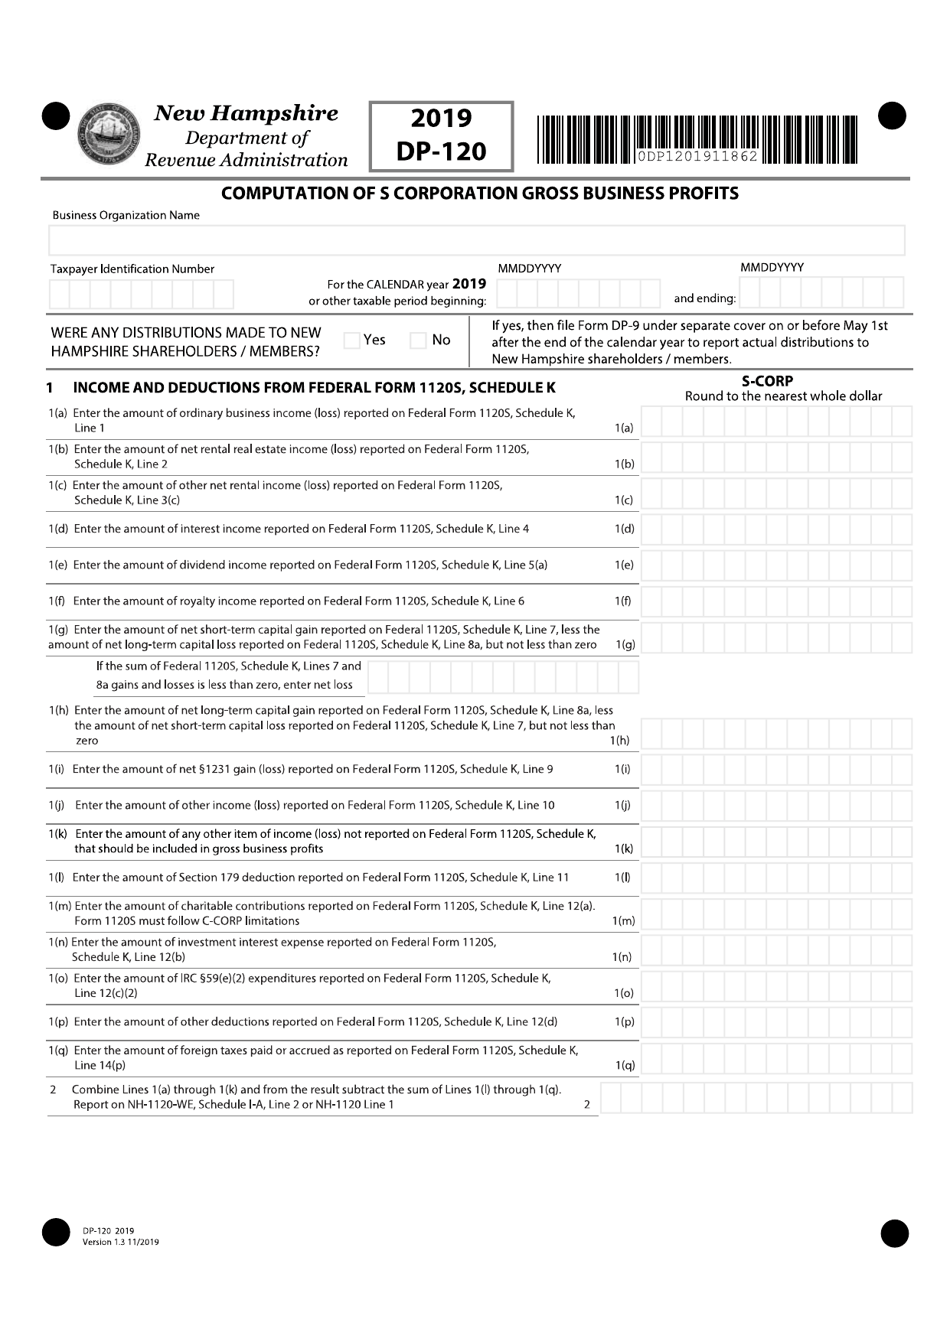 Form DP-120 Computation of S Corporation Gross Business Profits - New Hampshire, Page 1